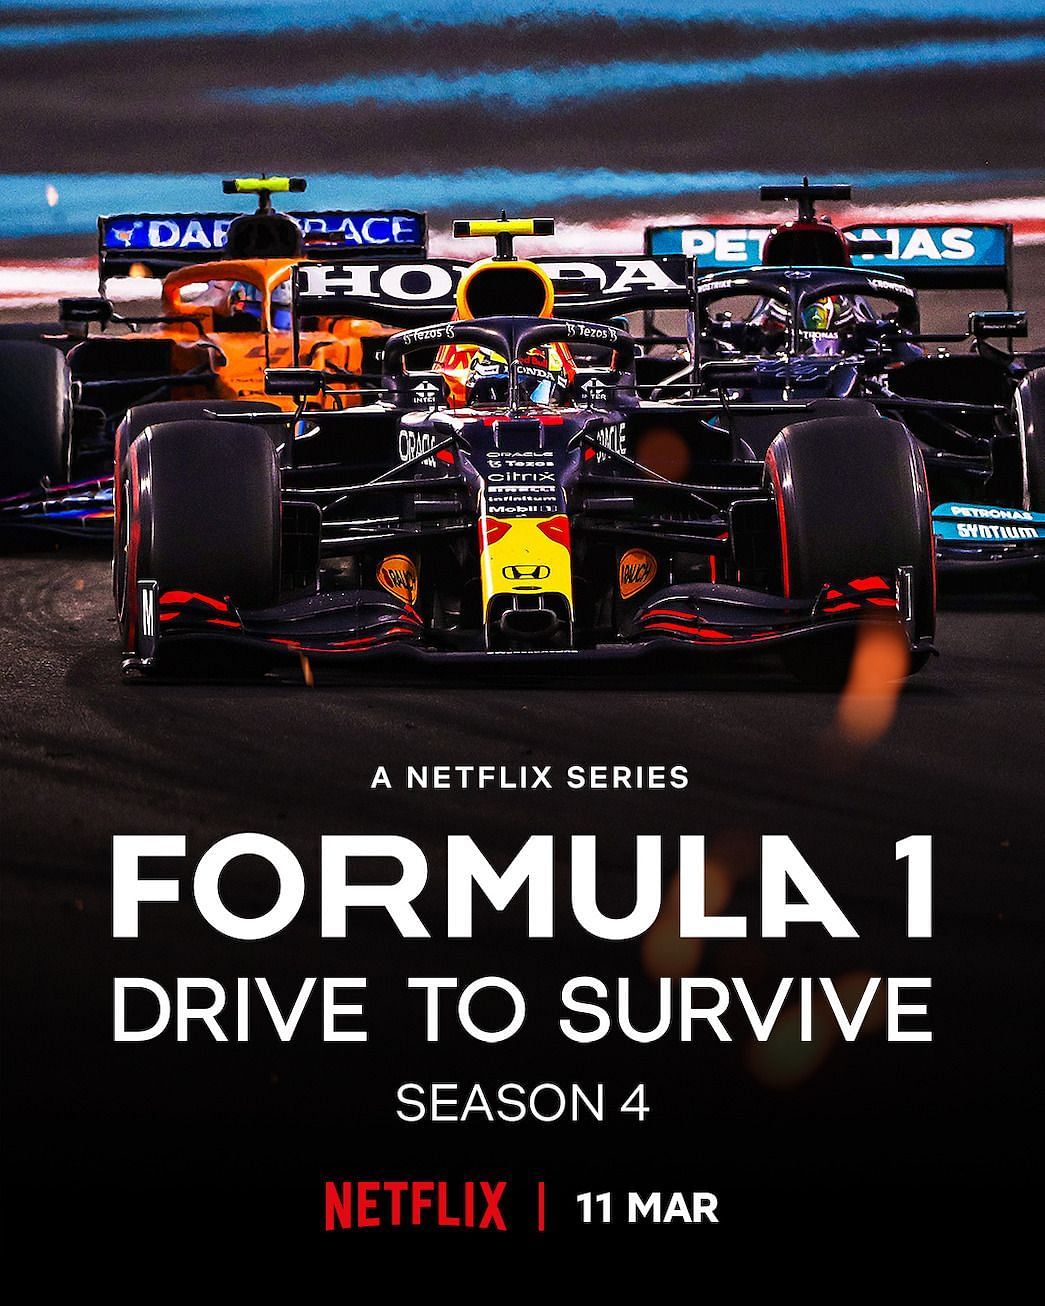 Netflix Drive to Survive Season 4 is ready to premiere on March 11, 2022